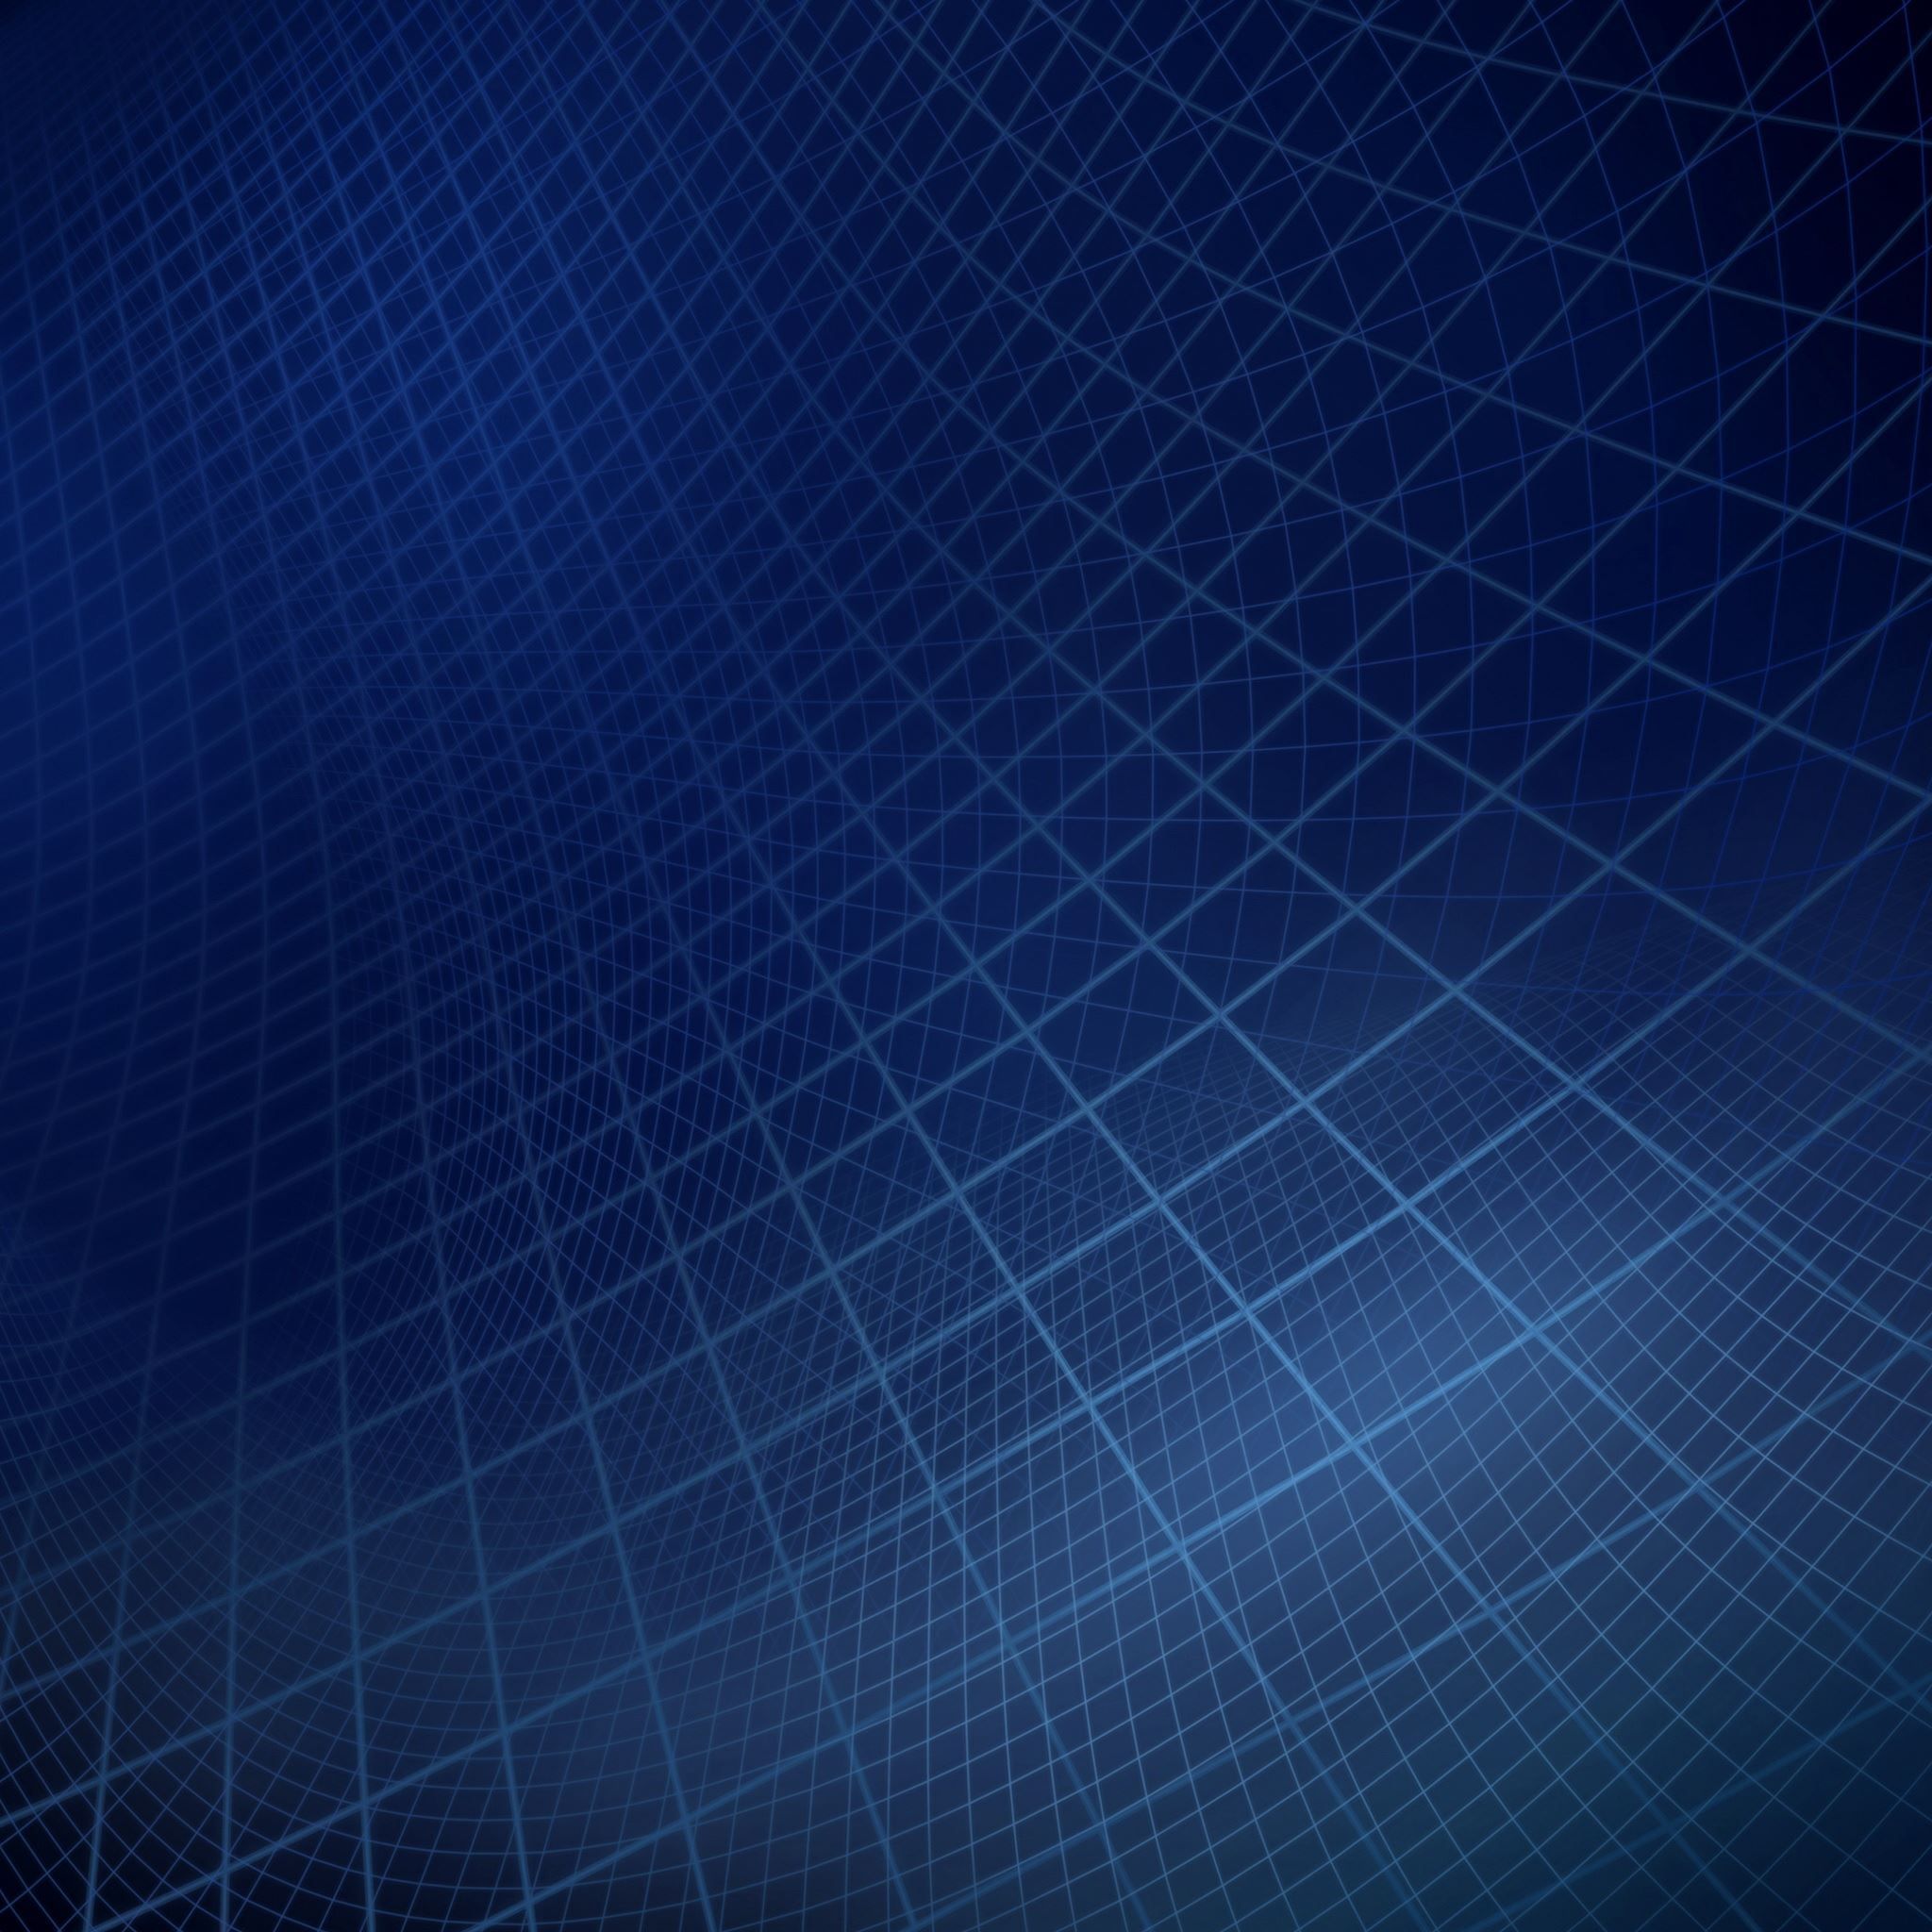 Blue Curved Grid Pattern iPad Air Wallpaper Free Download